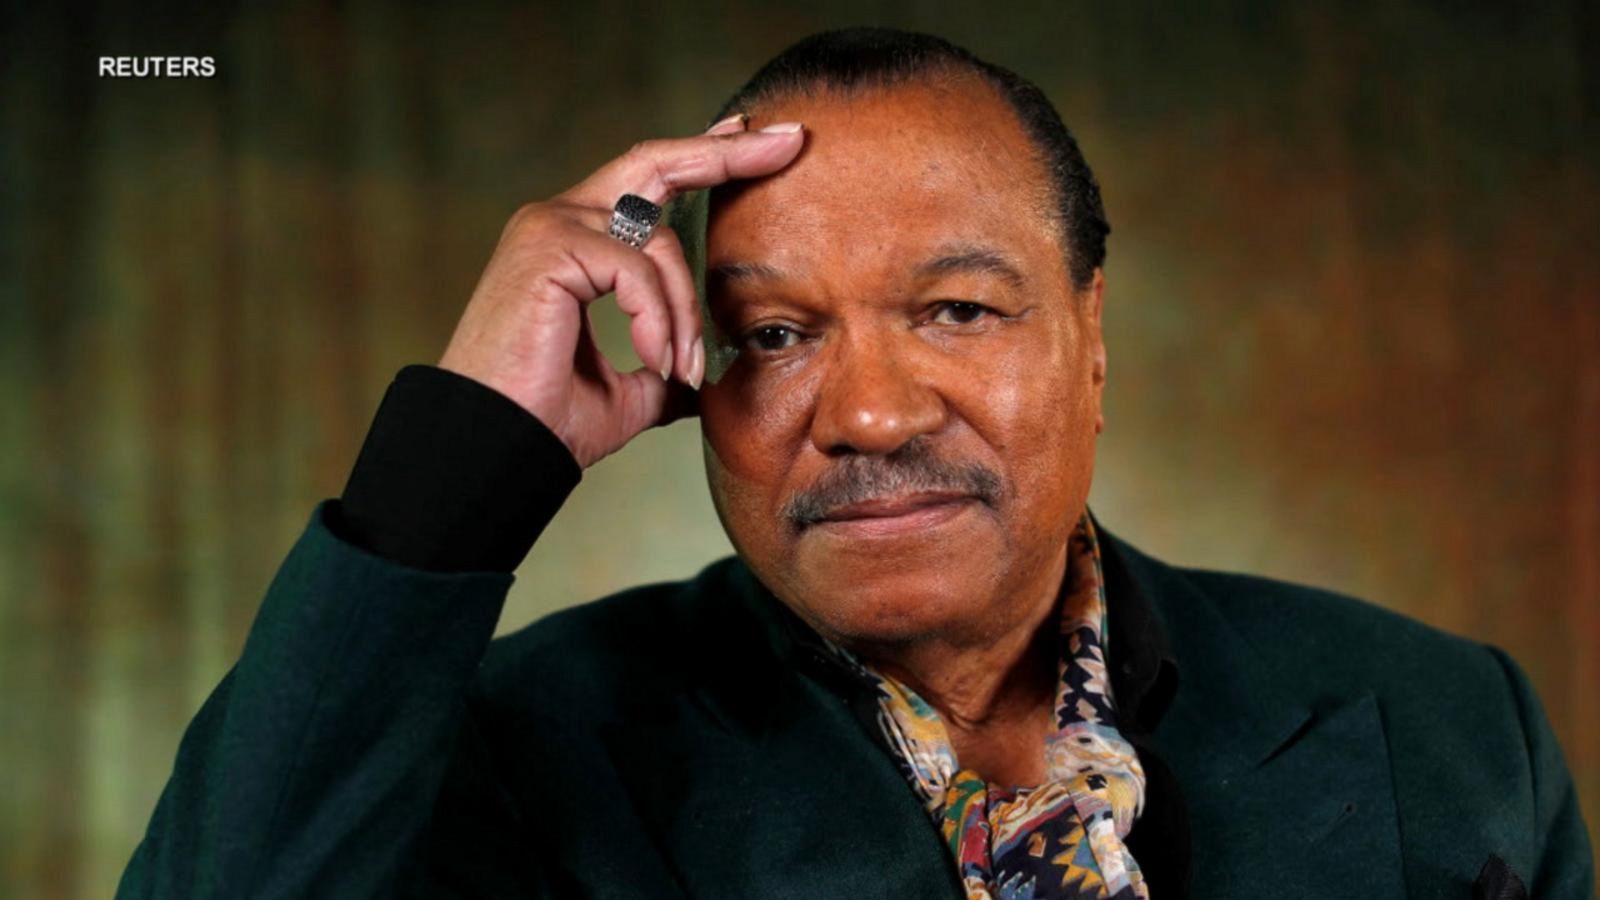 Star Wars Actor Billy Dee Williams Opens Up About Gender Fluidity